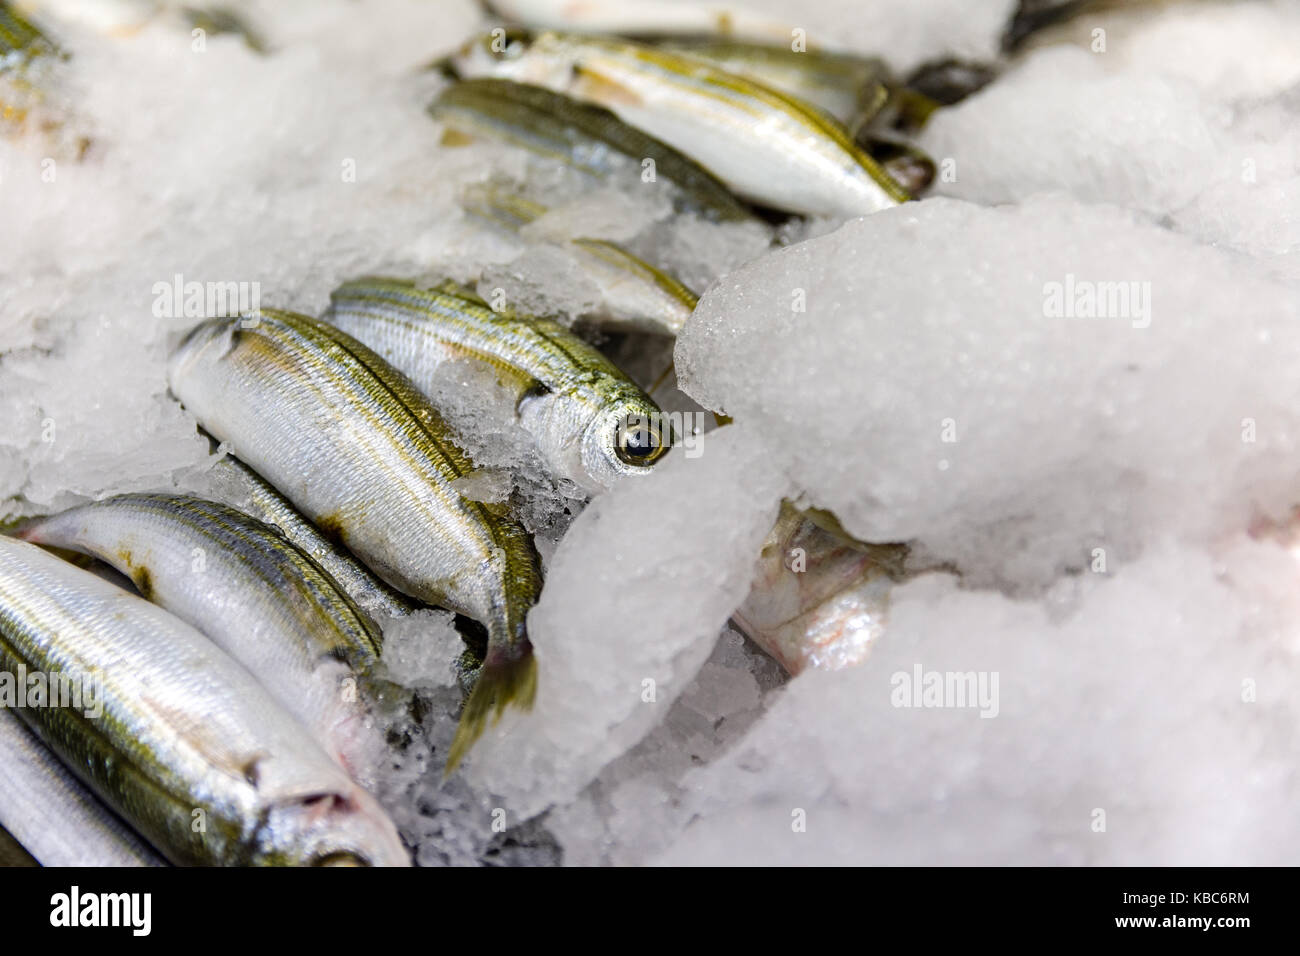 Close-Up Of Freshly Caught Bogue Fish Or Boops Boops For Sale In The Greek Fish Market Stock Photo